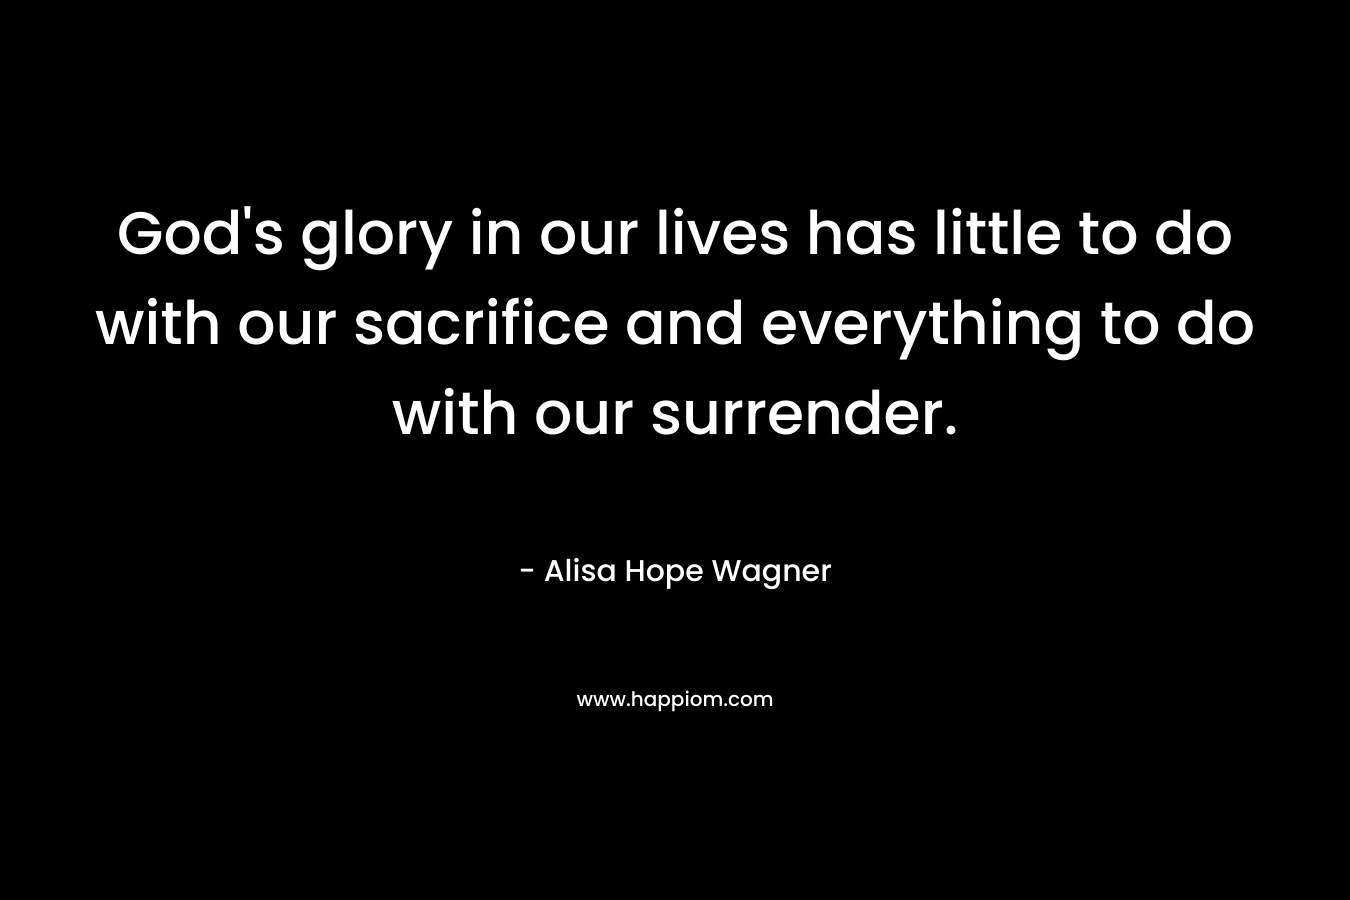 God's glory in our lives has little to do with our sacrifice and everything to do with our surrender.